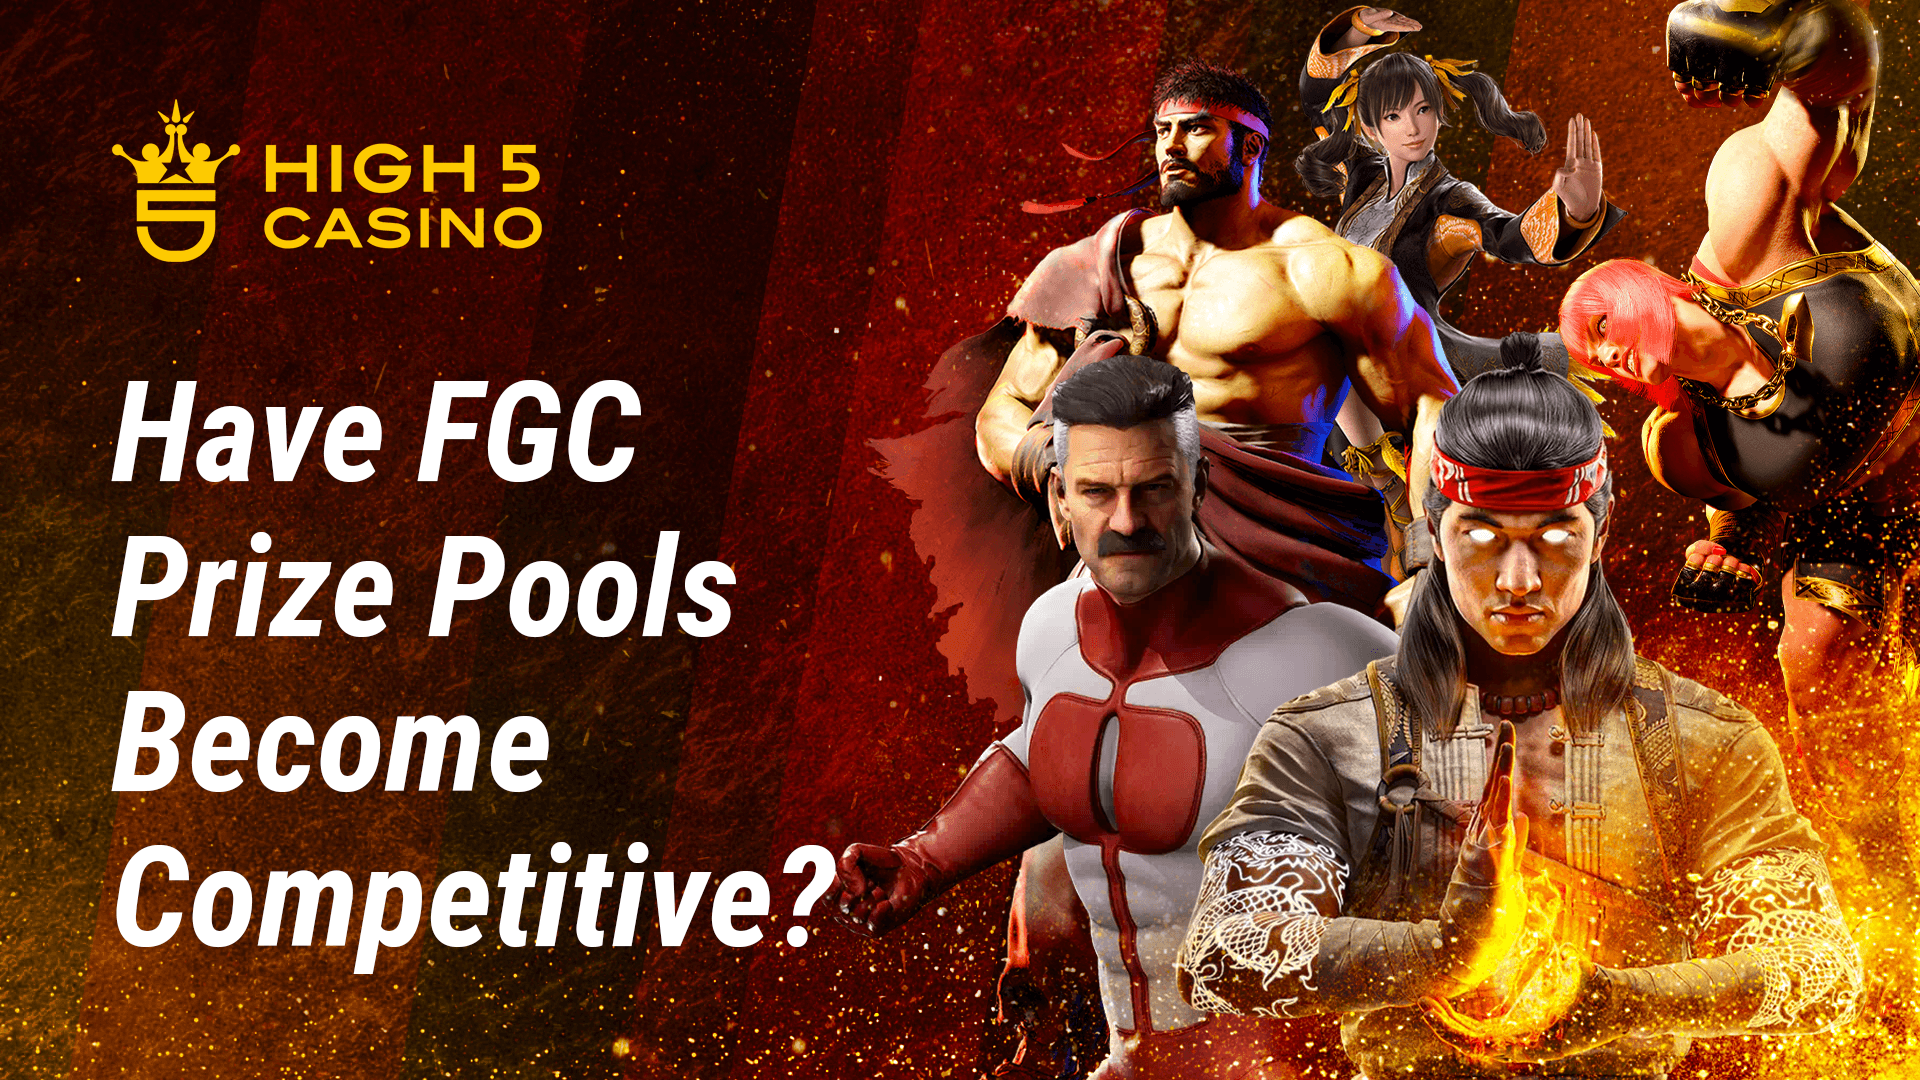 Have FGC Prize Pools Become Competitive?